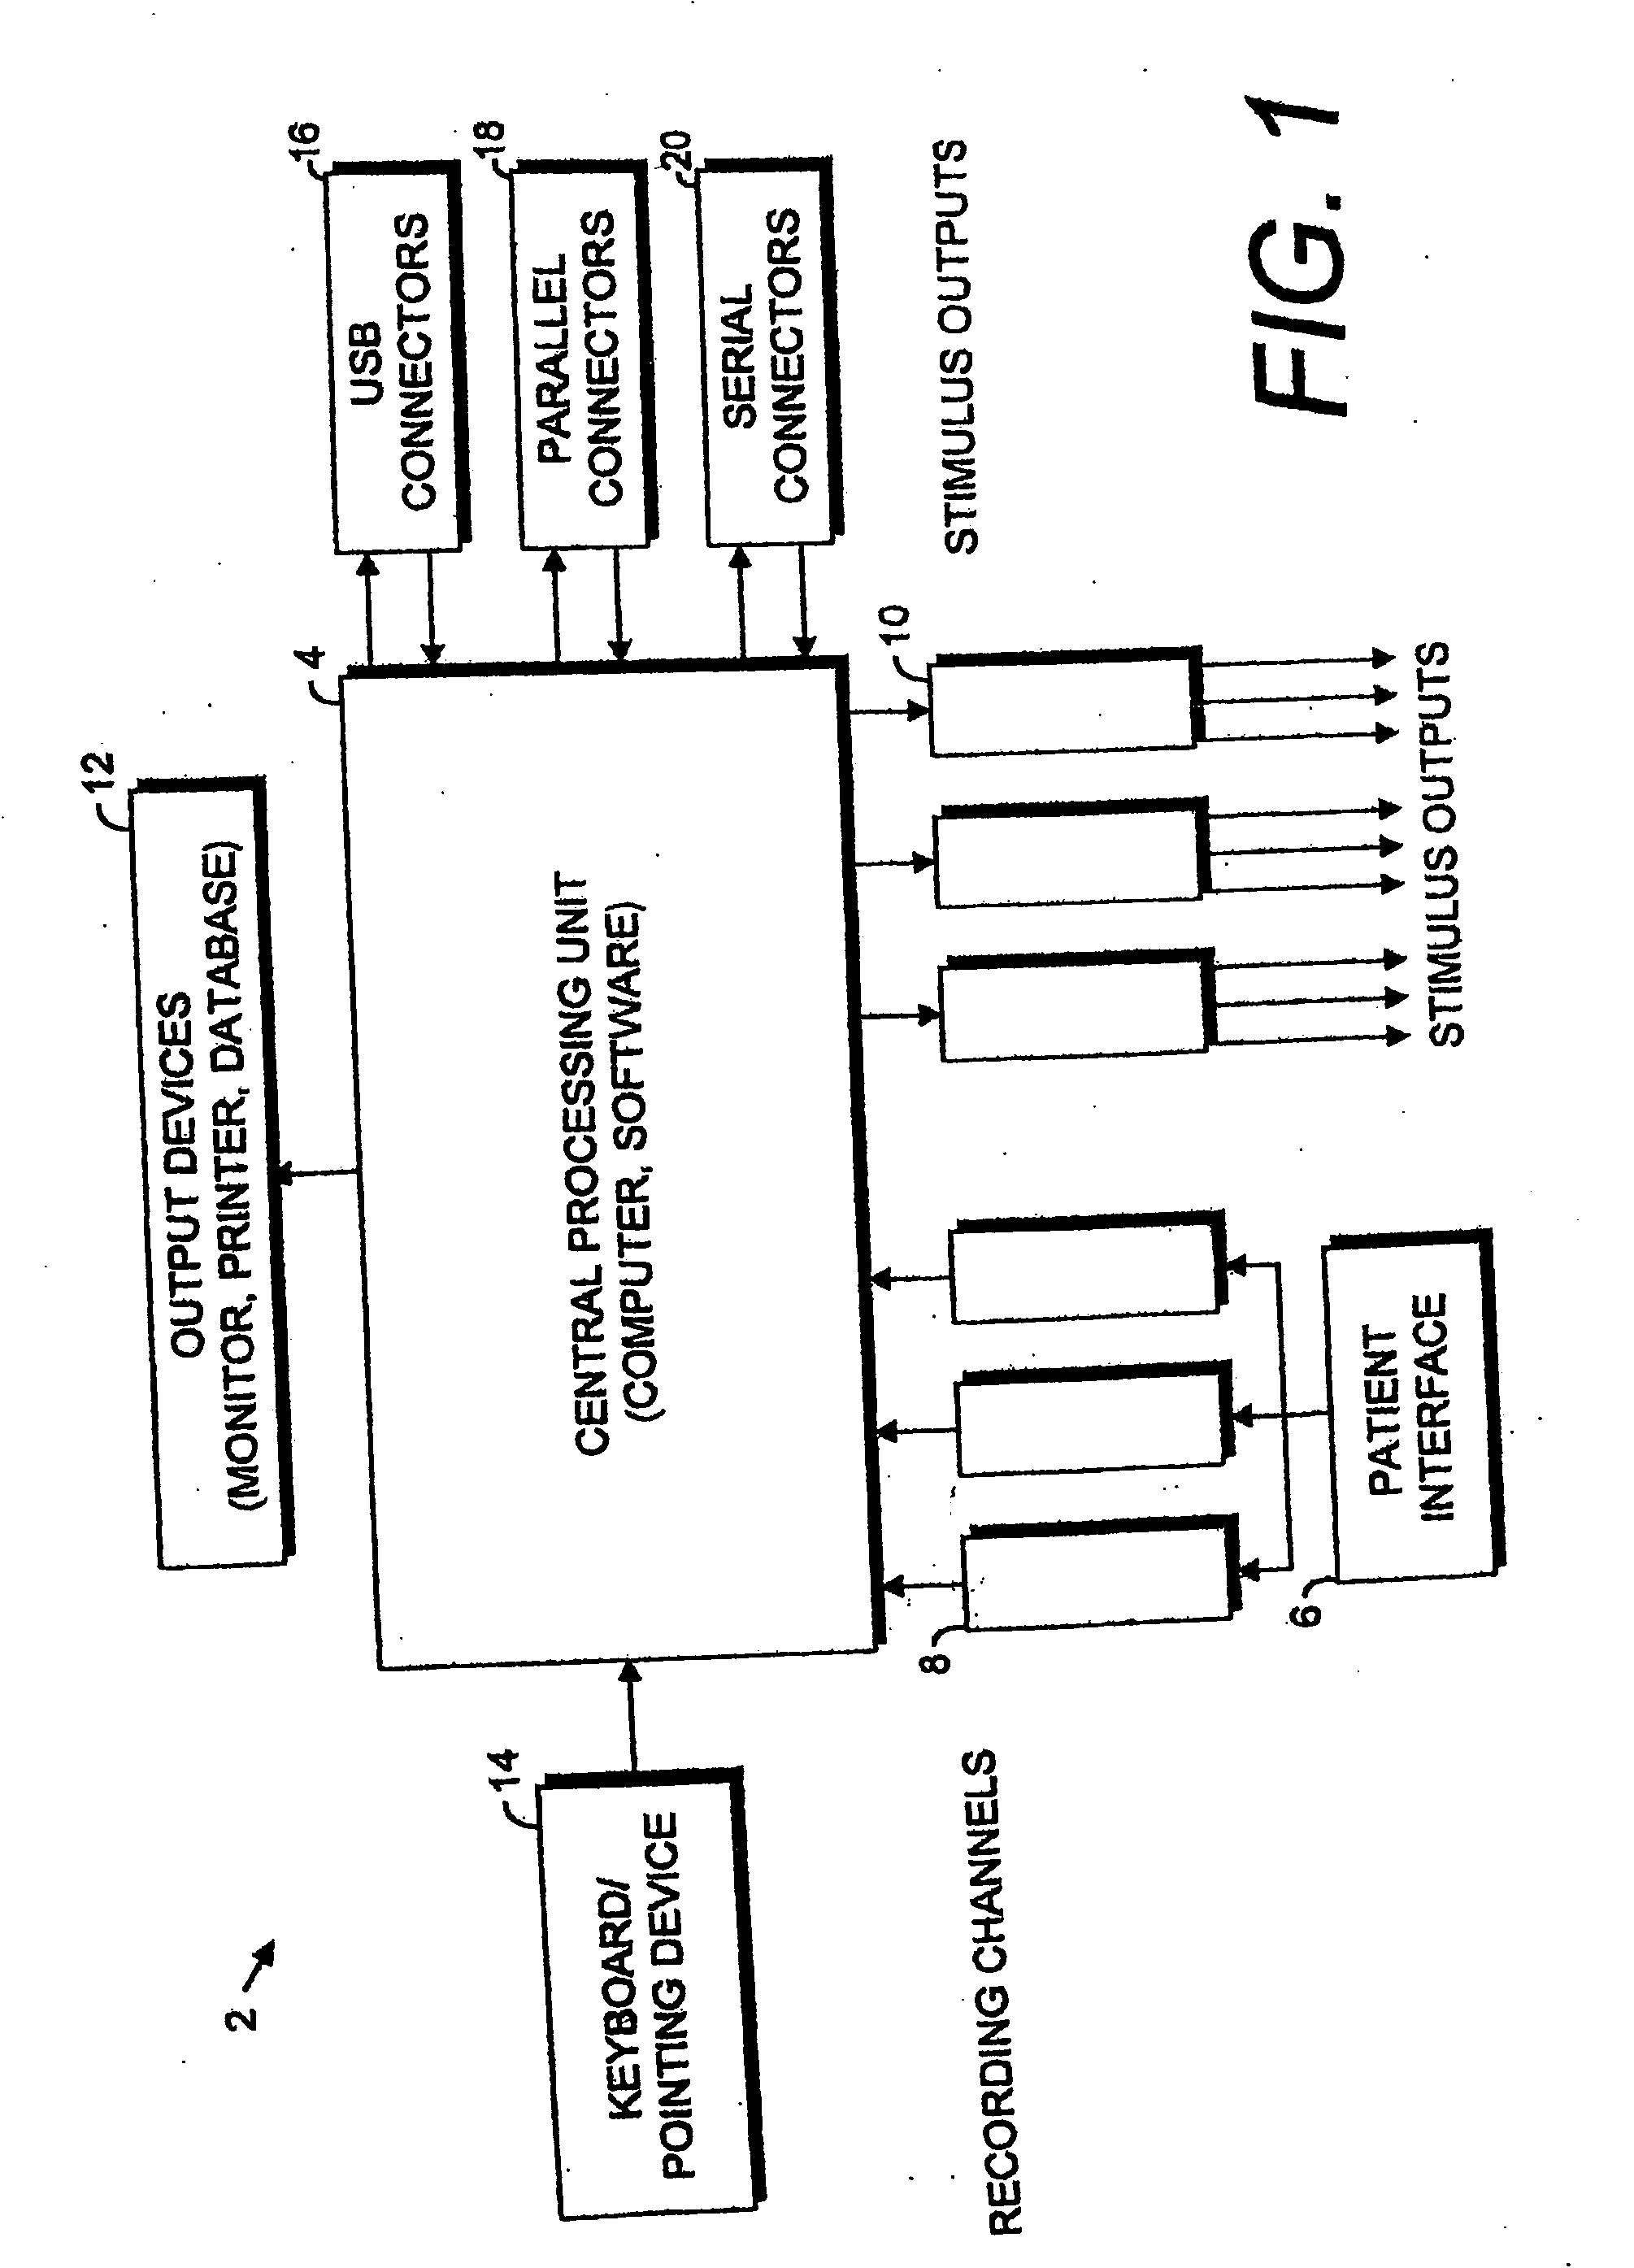 Physiological assessment system and method